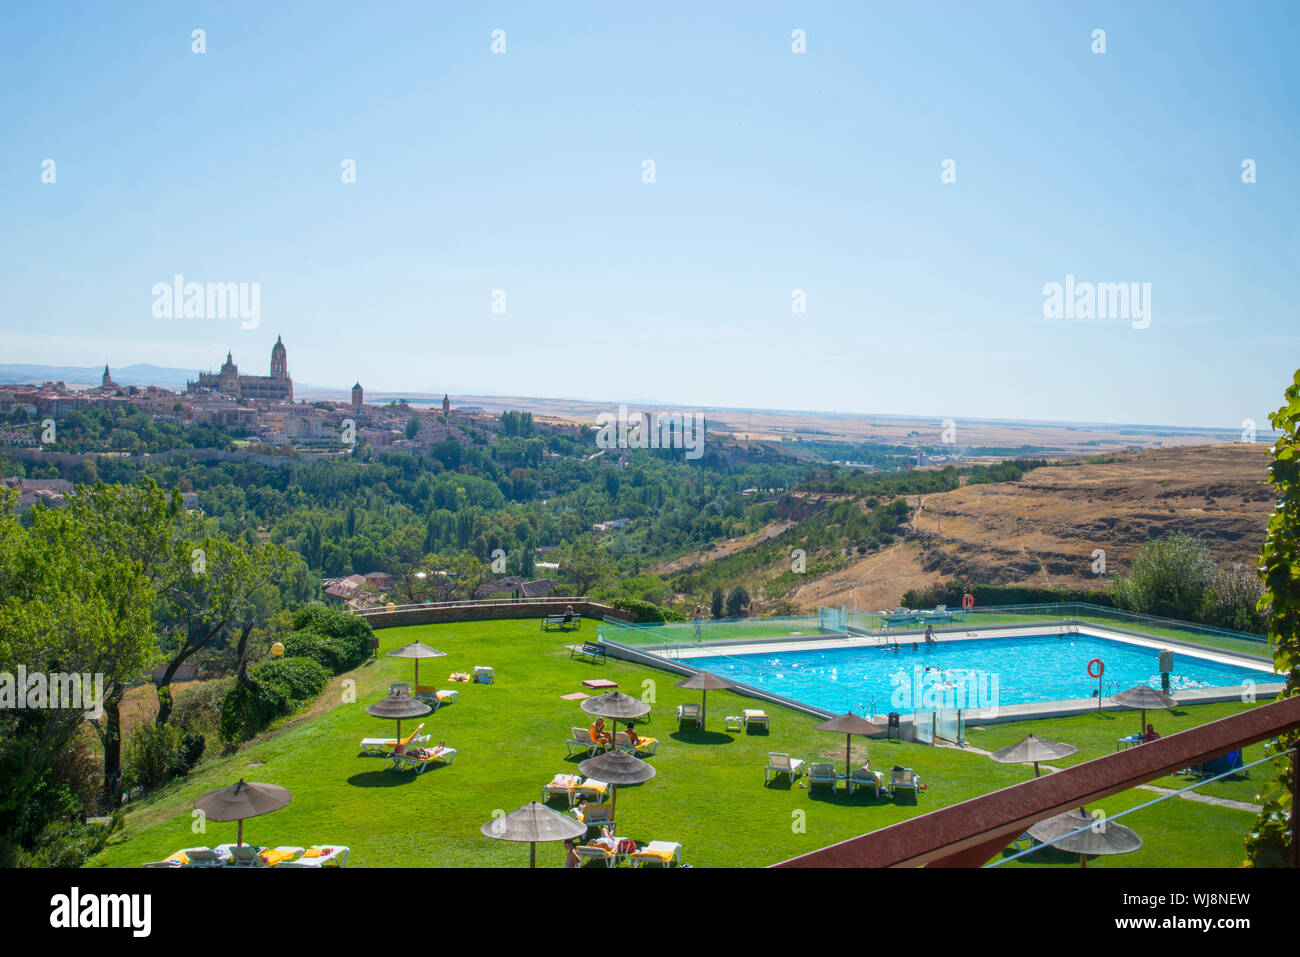 Swimming pool and garden of the parador and overview of the city. Segovia, Spain. Stock Photo